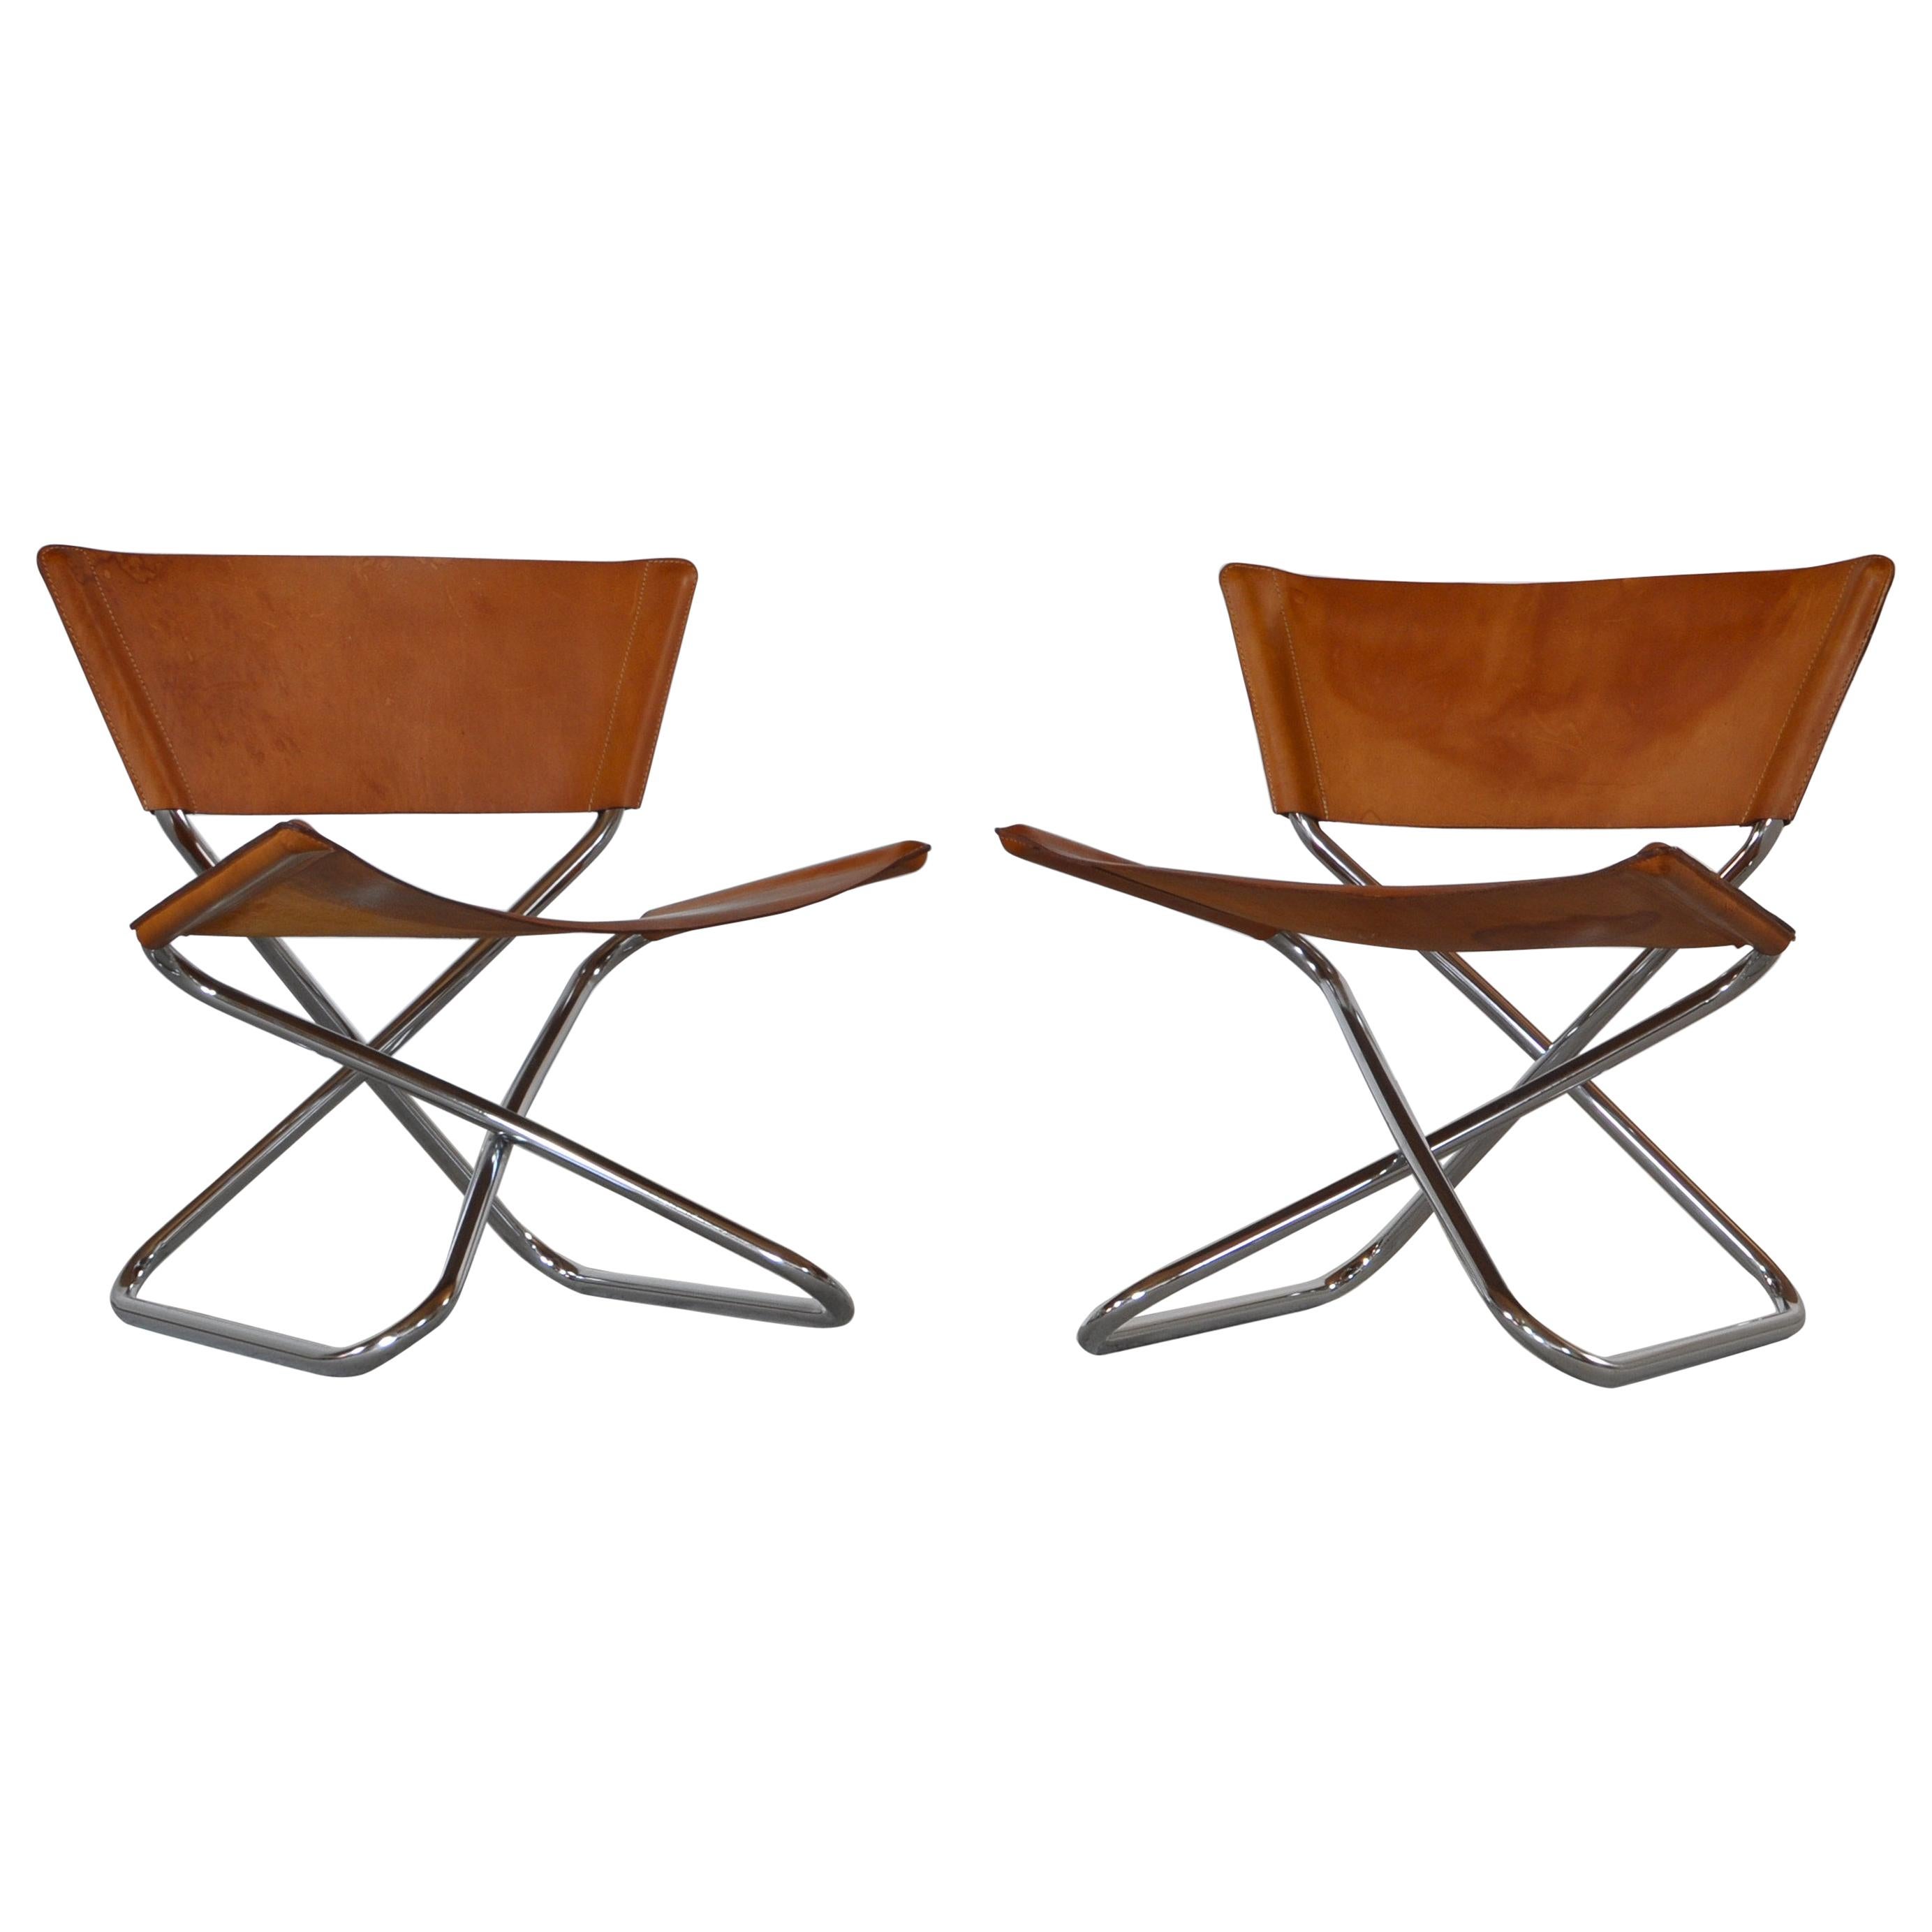 Danish Modern Lounge Chairs in Saddle Leather and Steel by Erik Magnussen